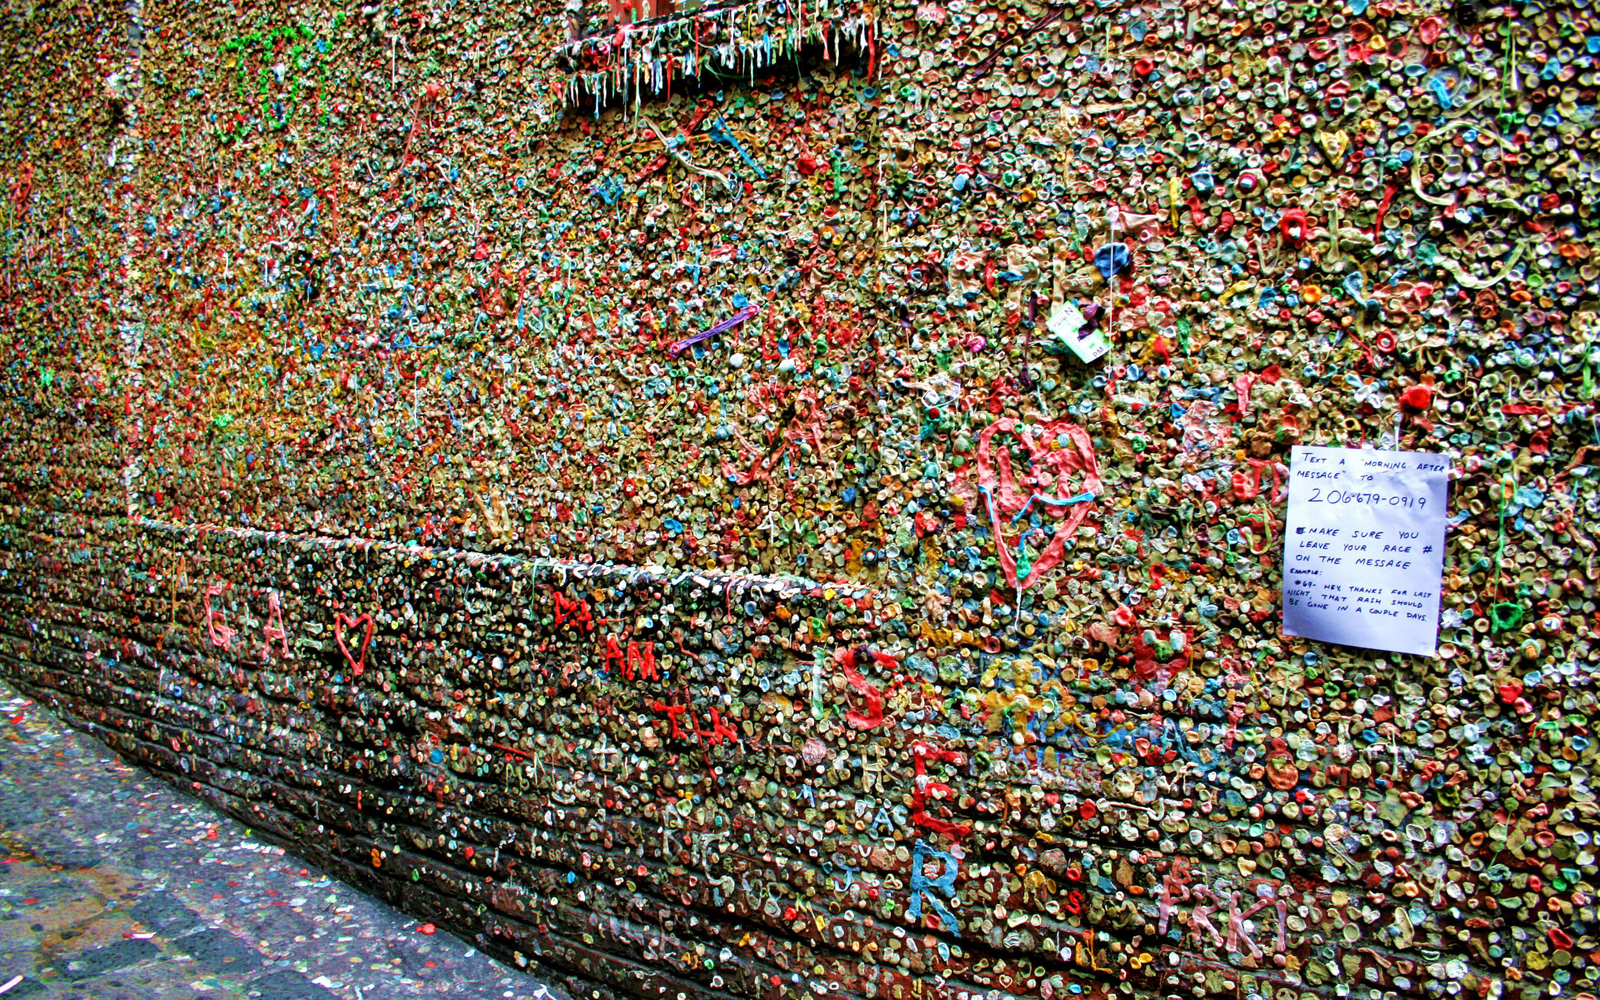 Pike Place Gum Wall, Seattle